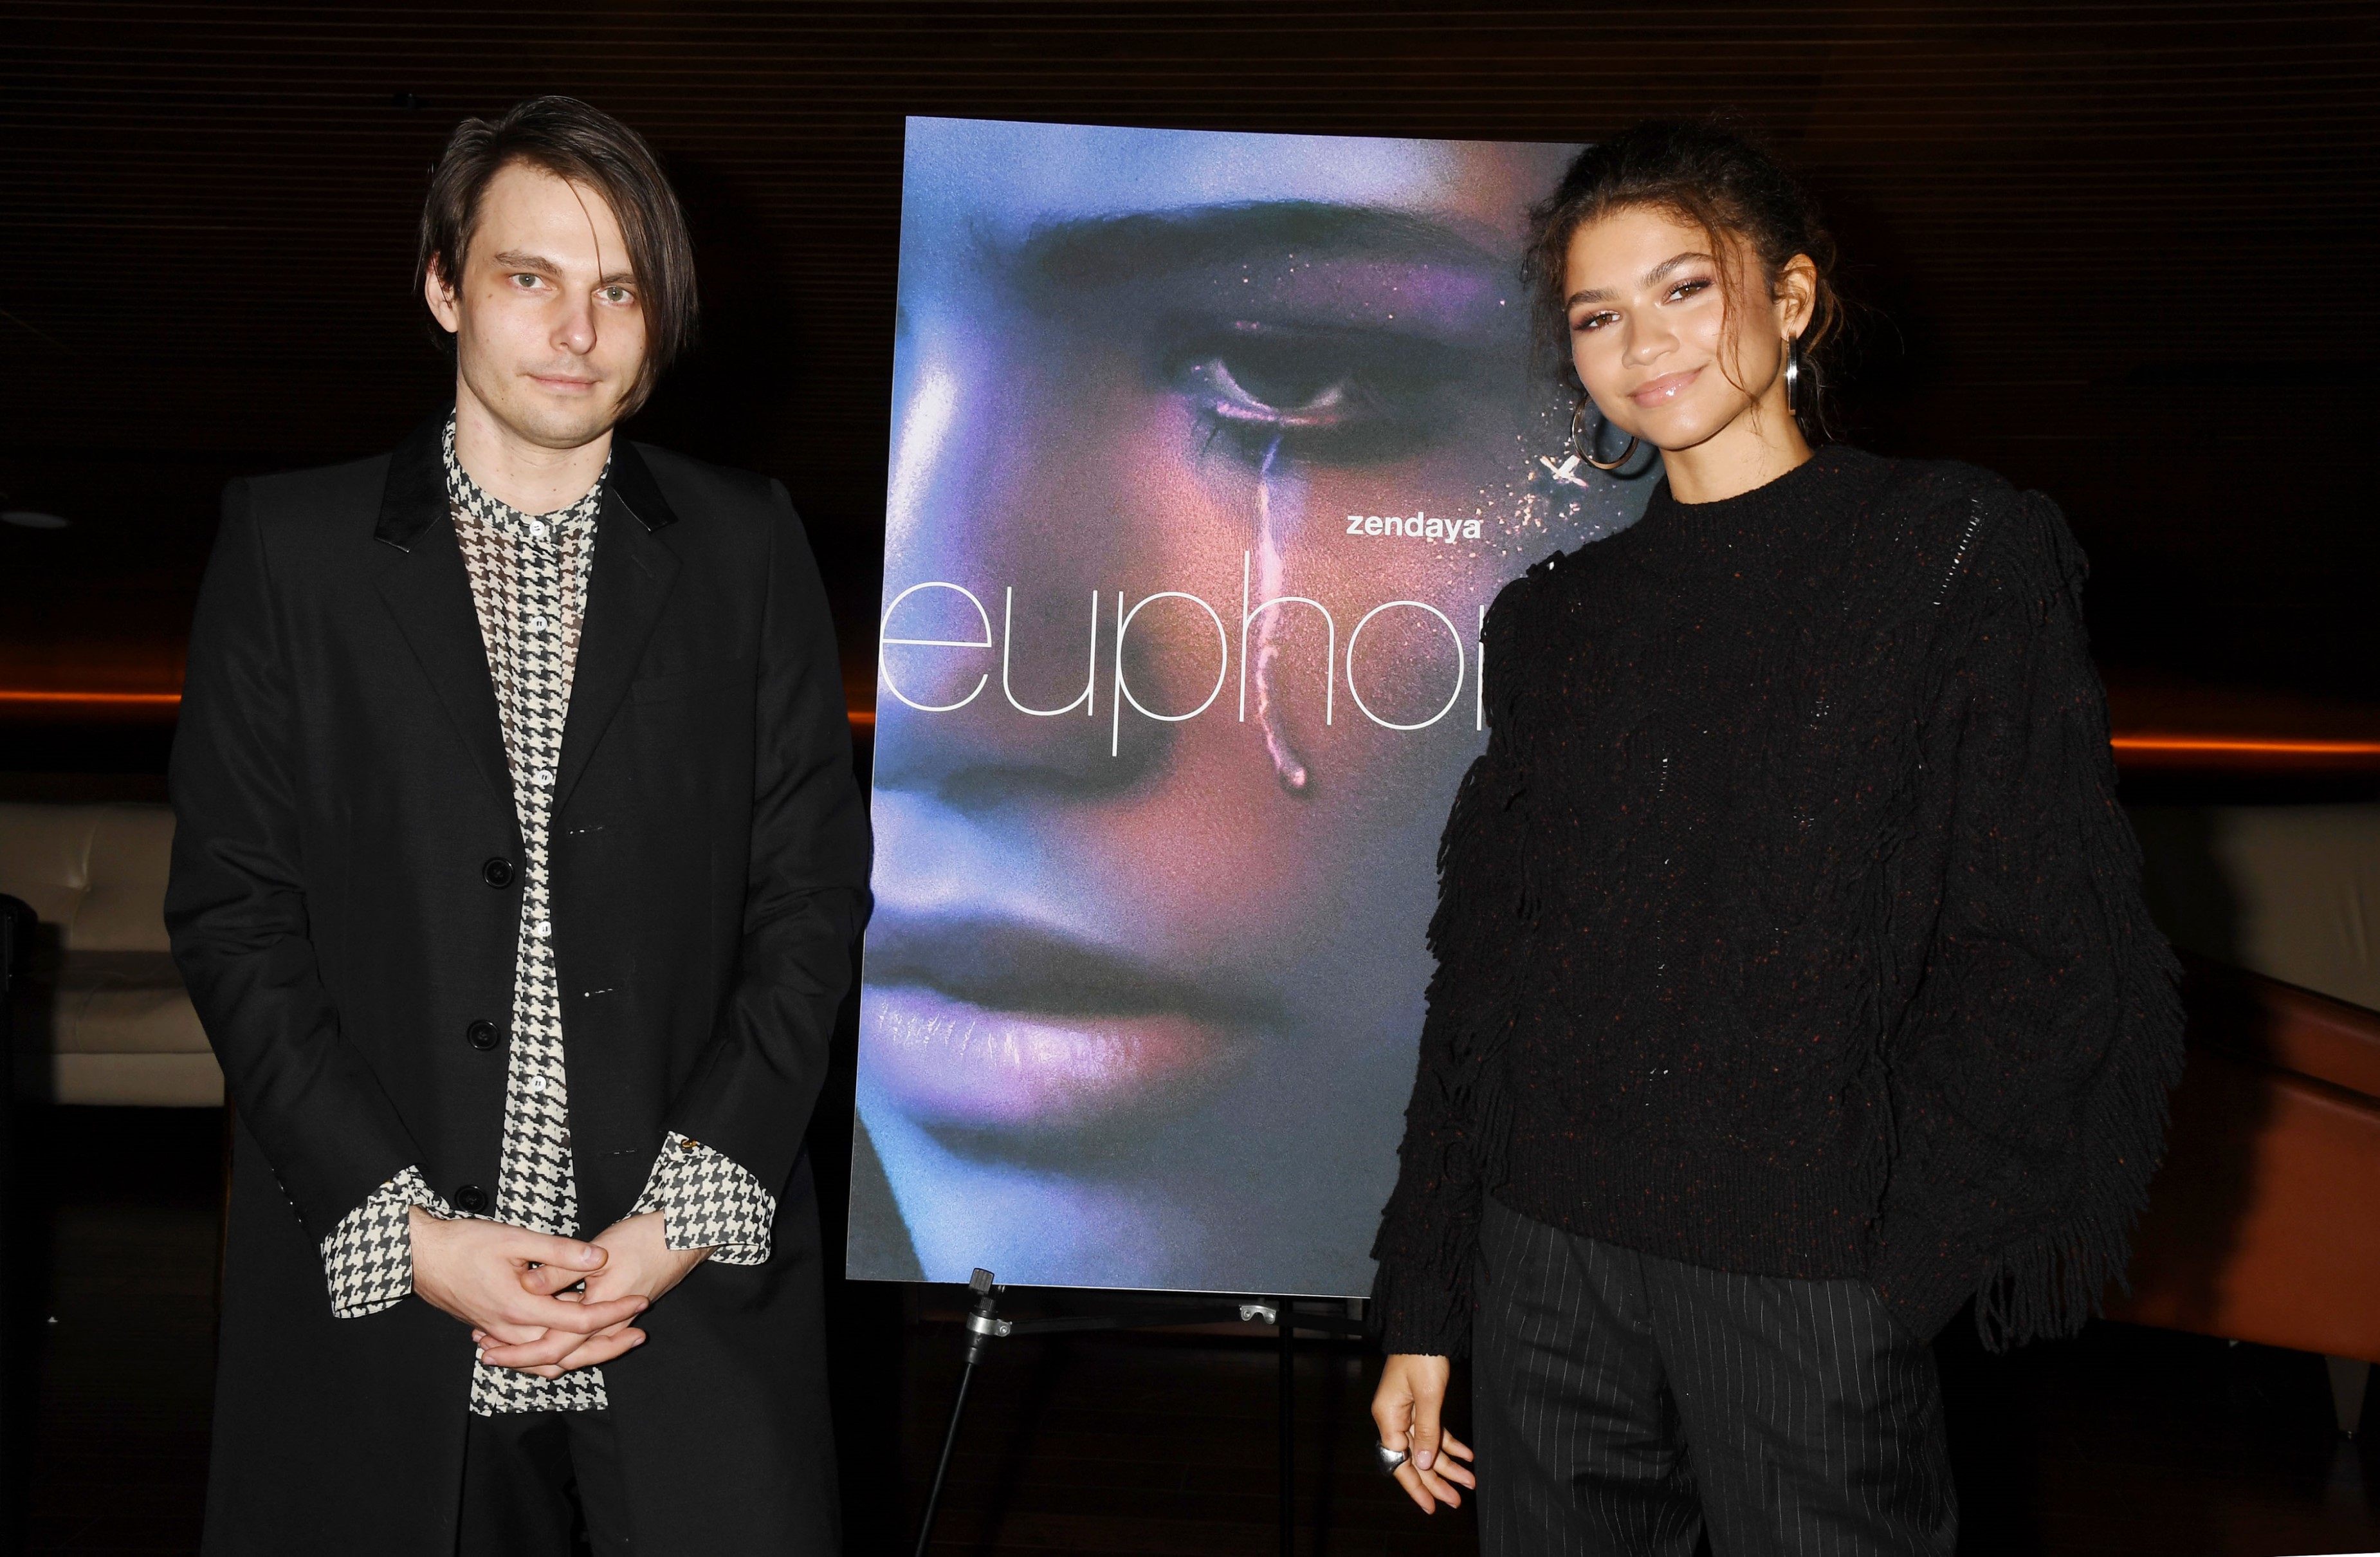 Sam Levinson and Zendaya attend the HBO "Euphoria" FYC at the Landmark Theaters